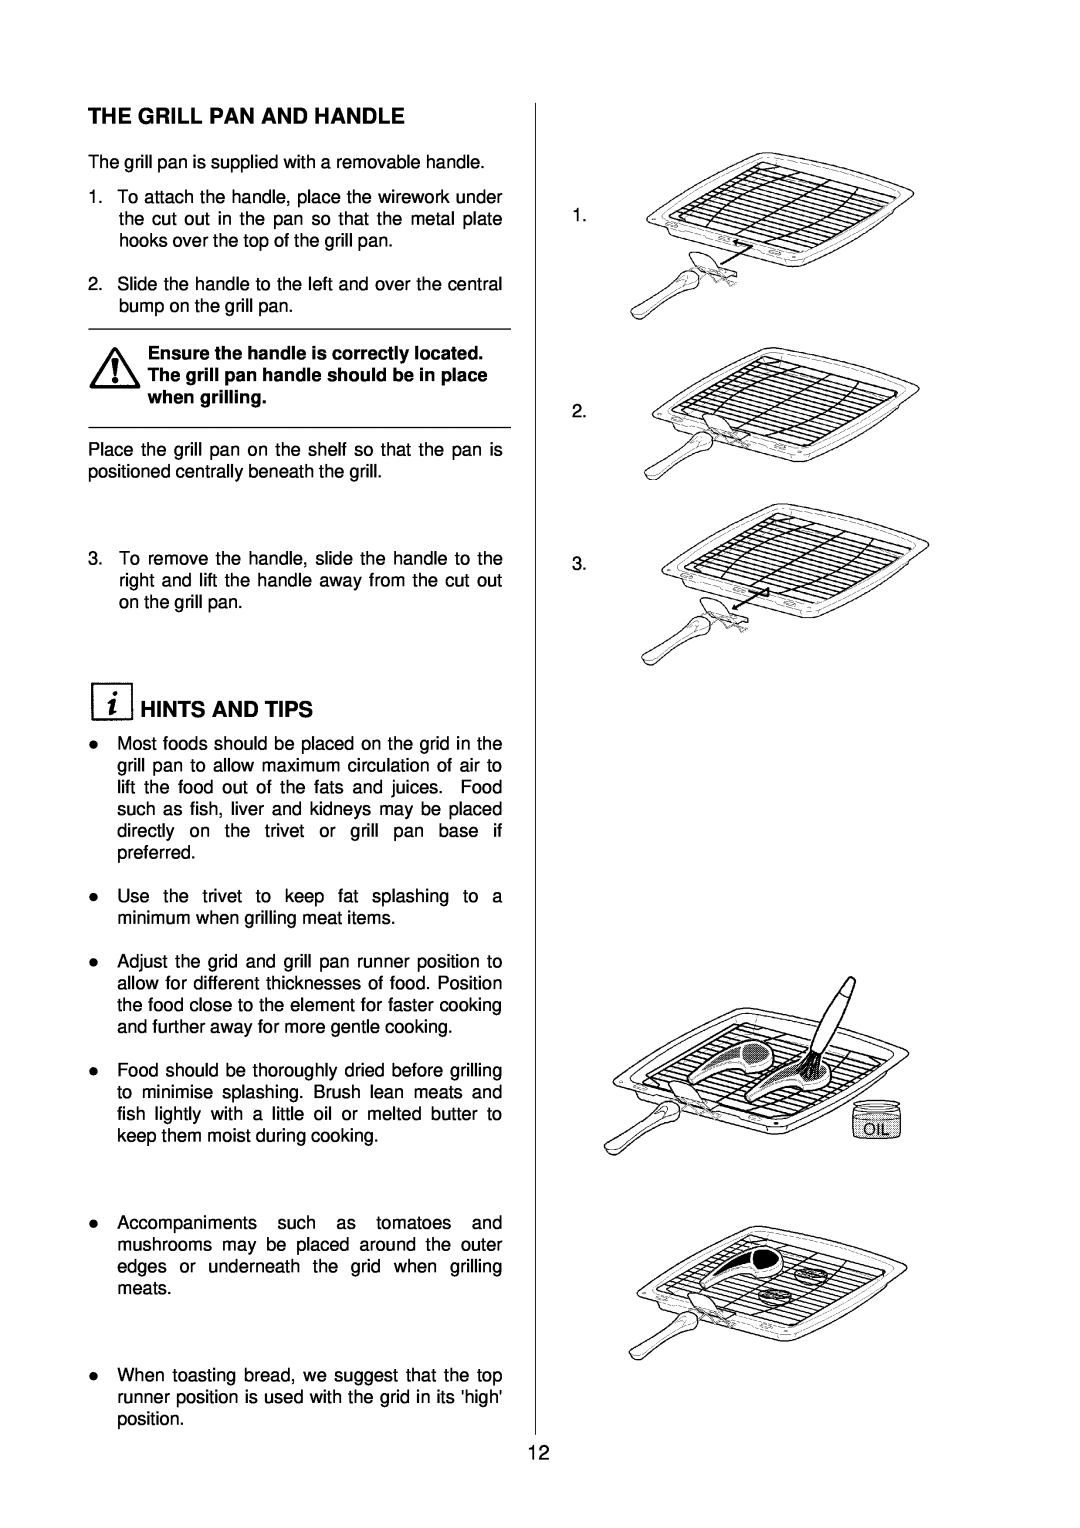 Electrolux D2160 installation instructions The Grill Pan And Handle, l HINTS AND TIPS 